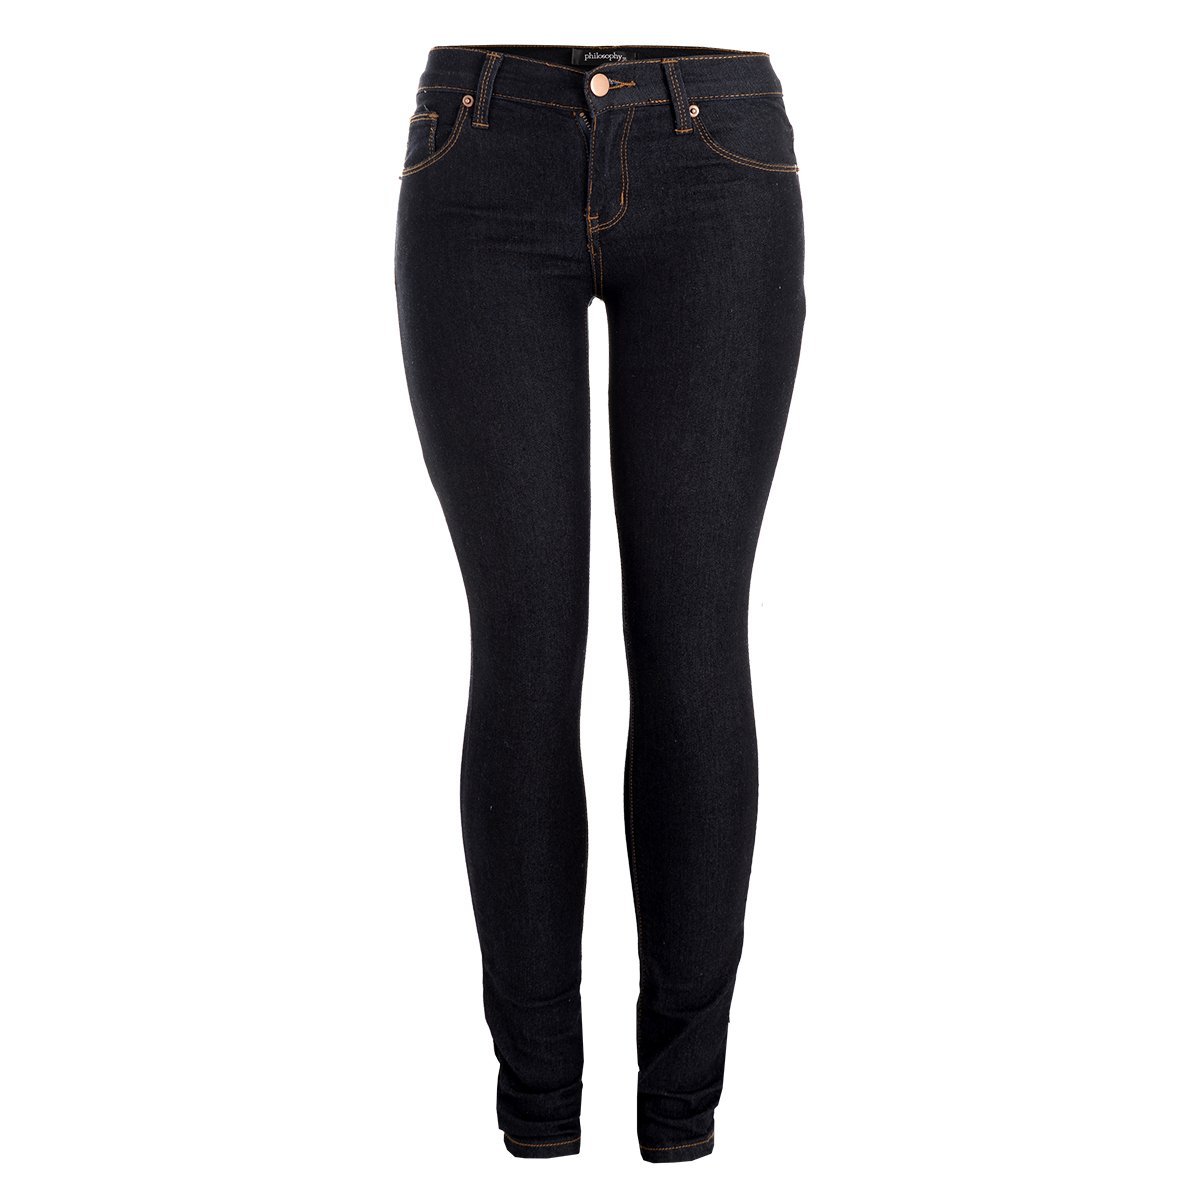 Jeans Corte Skinny Obscuro Philosophy